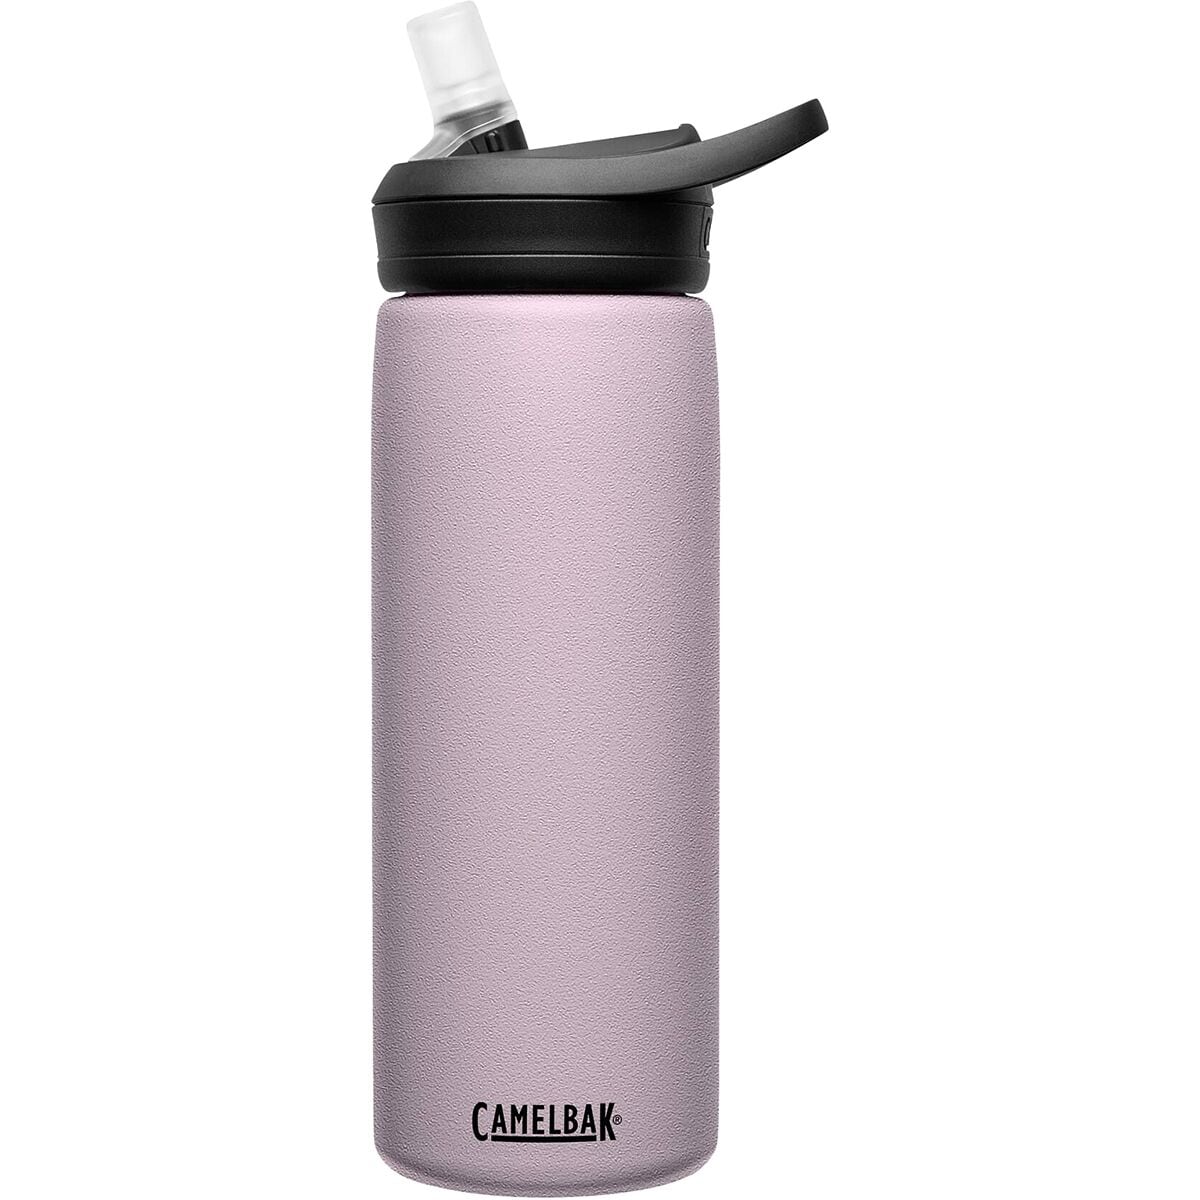 Photos - Glass CamelBak Eddy + Stainless Vacuum Insulated 0.6L Water Bottle 